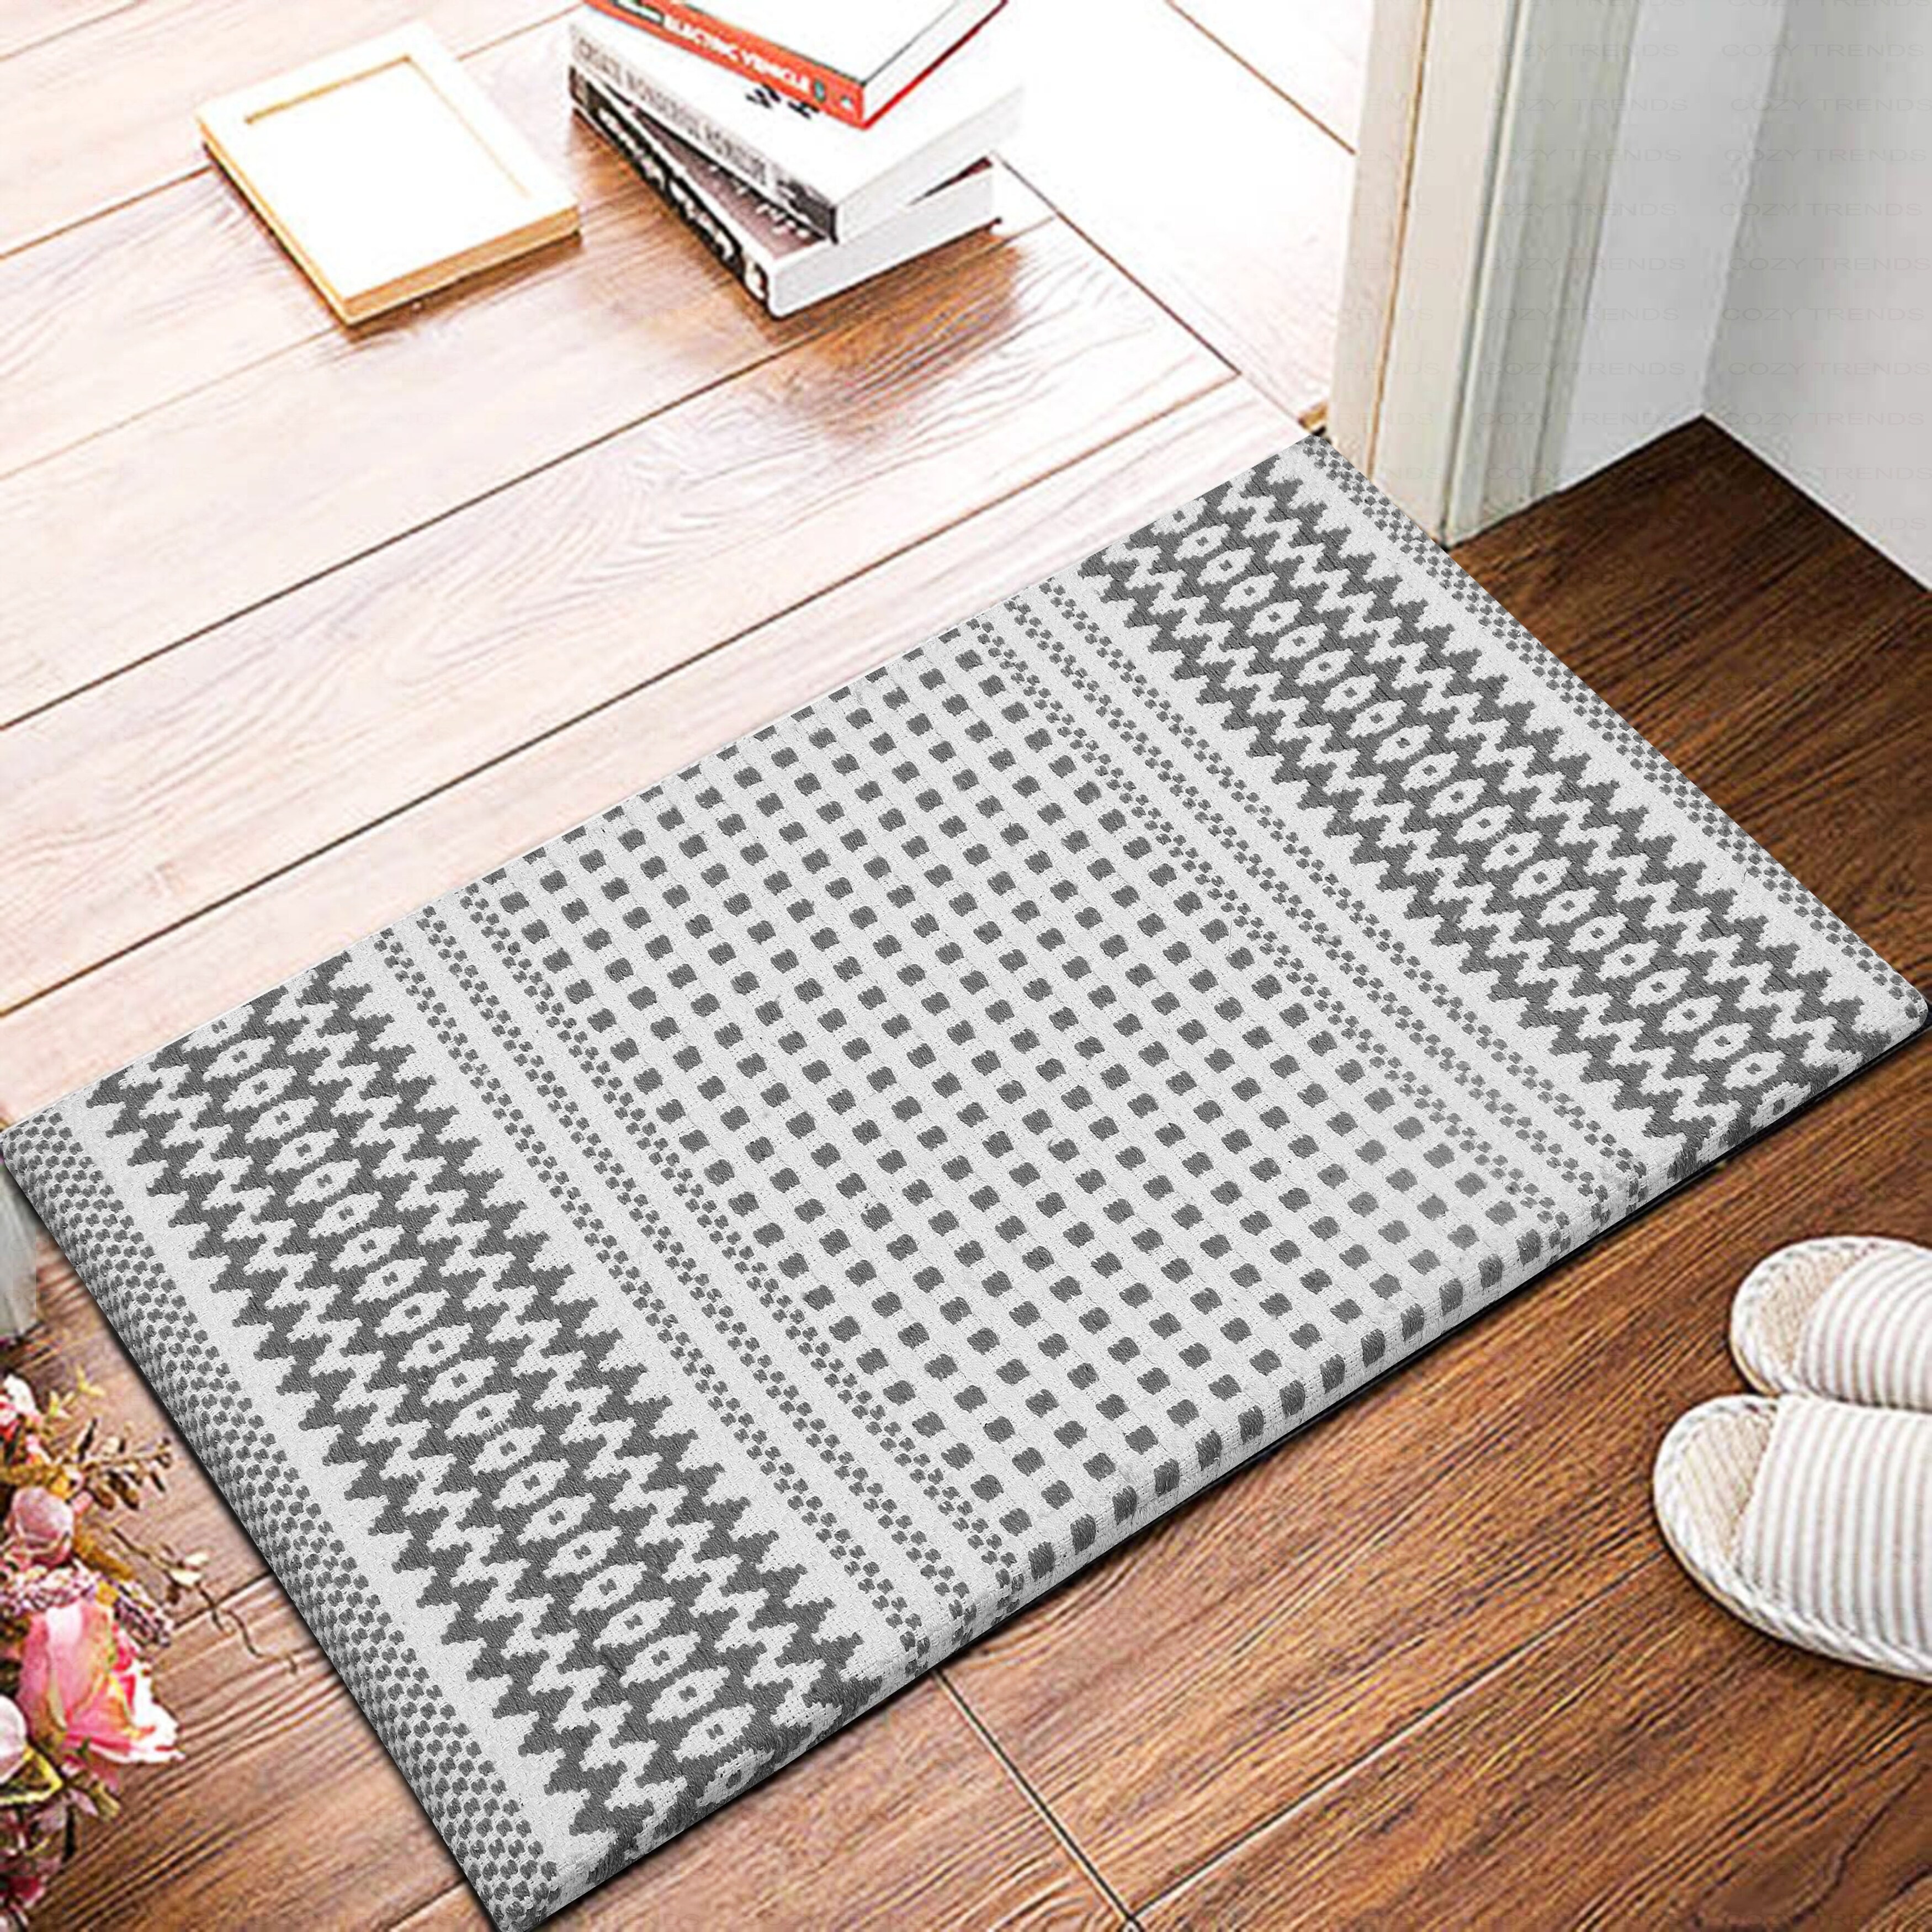 https://ak1.ostkcdn.com/images/products/is/images/direct/fa571f8910005ab9fa148853a75069dec8c58a4e/Kitchen-Mat-Cushioned-Anti-Fatigue-Kitchen-Rug%2C-Non-Slip-Mats-Comfort-Foam-Rug-for-Kitchen%2C-Office%2C-Sink%2C-Laundry---18%27%27x30%27%27.jpg